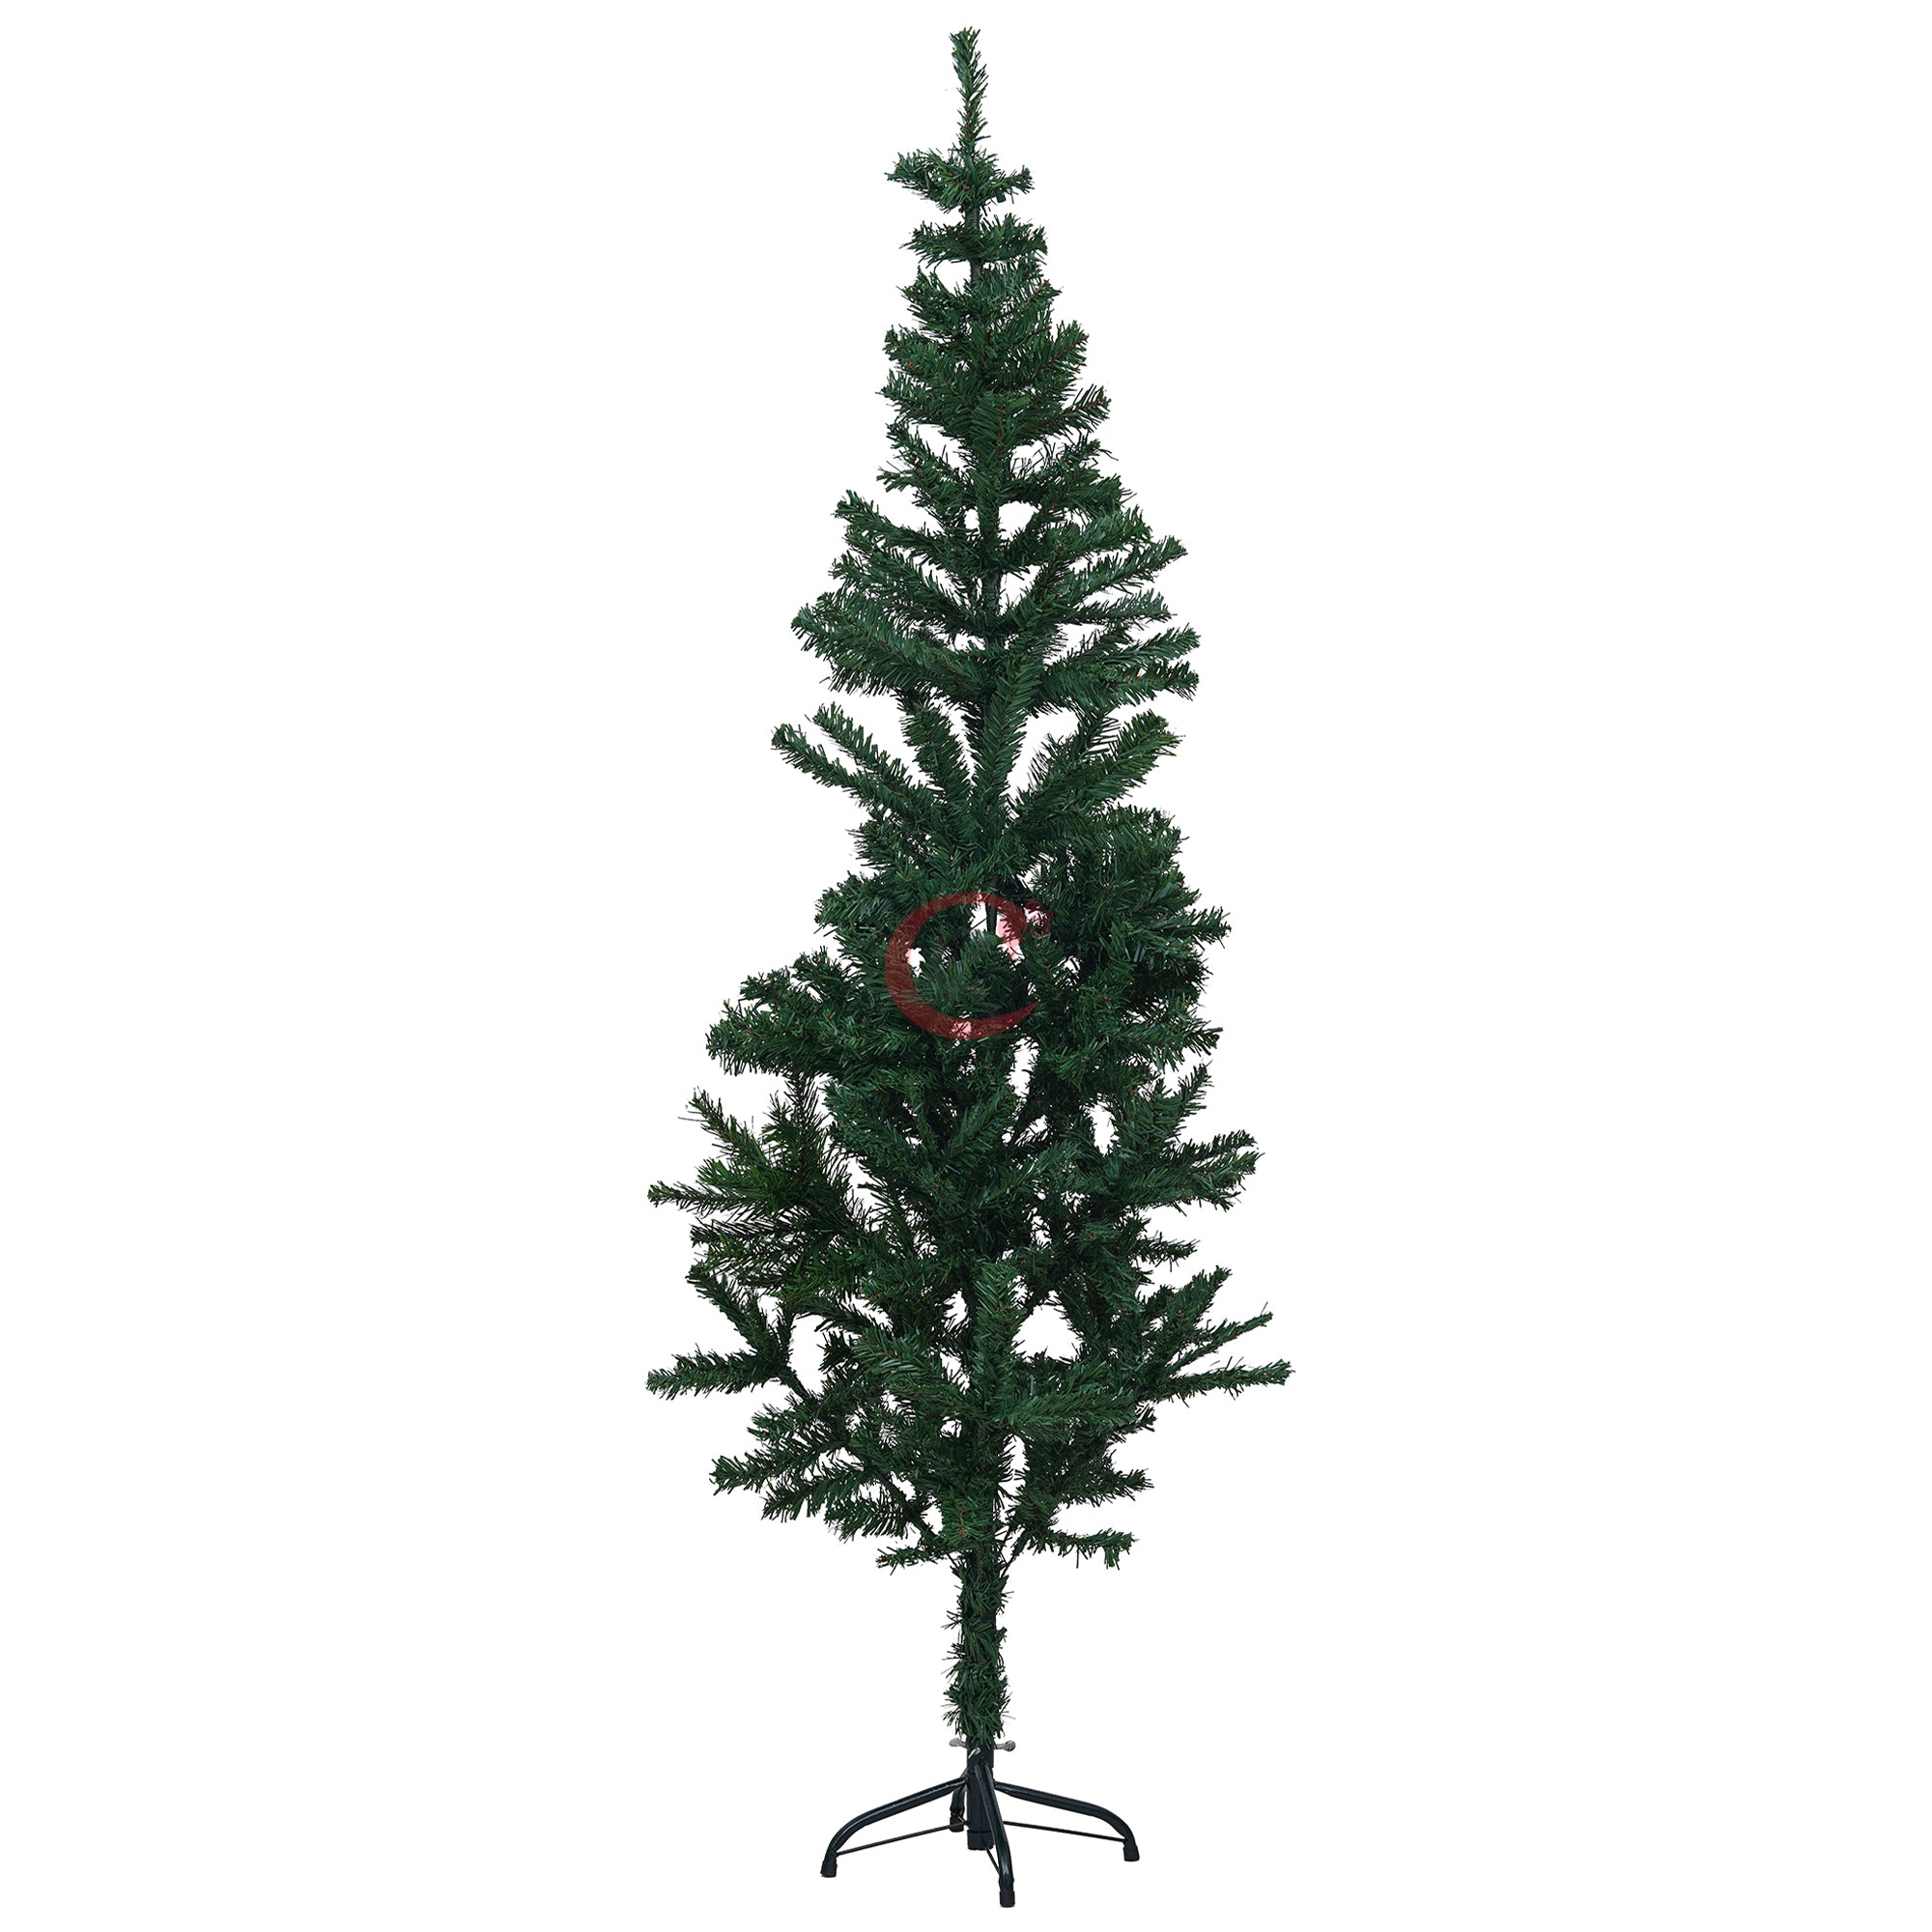 eCraftIndia 6 Feet Green Artificial Christmas Tree Xmas Pine Tree with Stand and 100 Christmas Decoration Ornaments Props - Merry Christmas Decoration Item for Home, Office, and Church 7